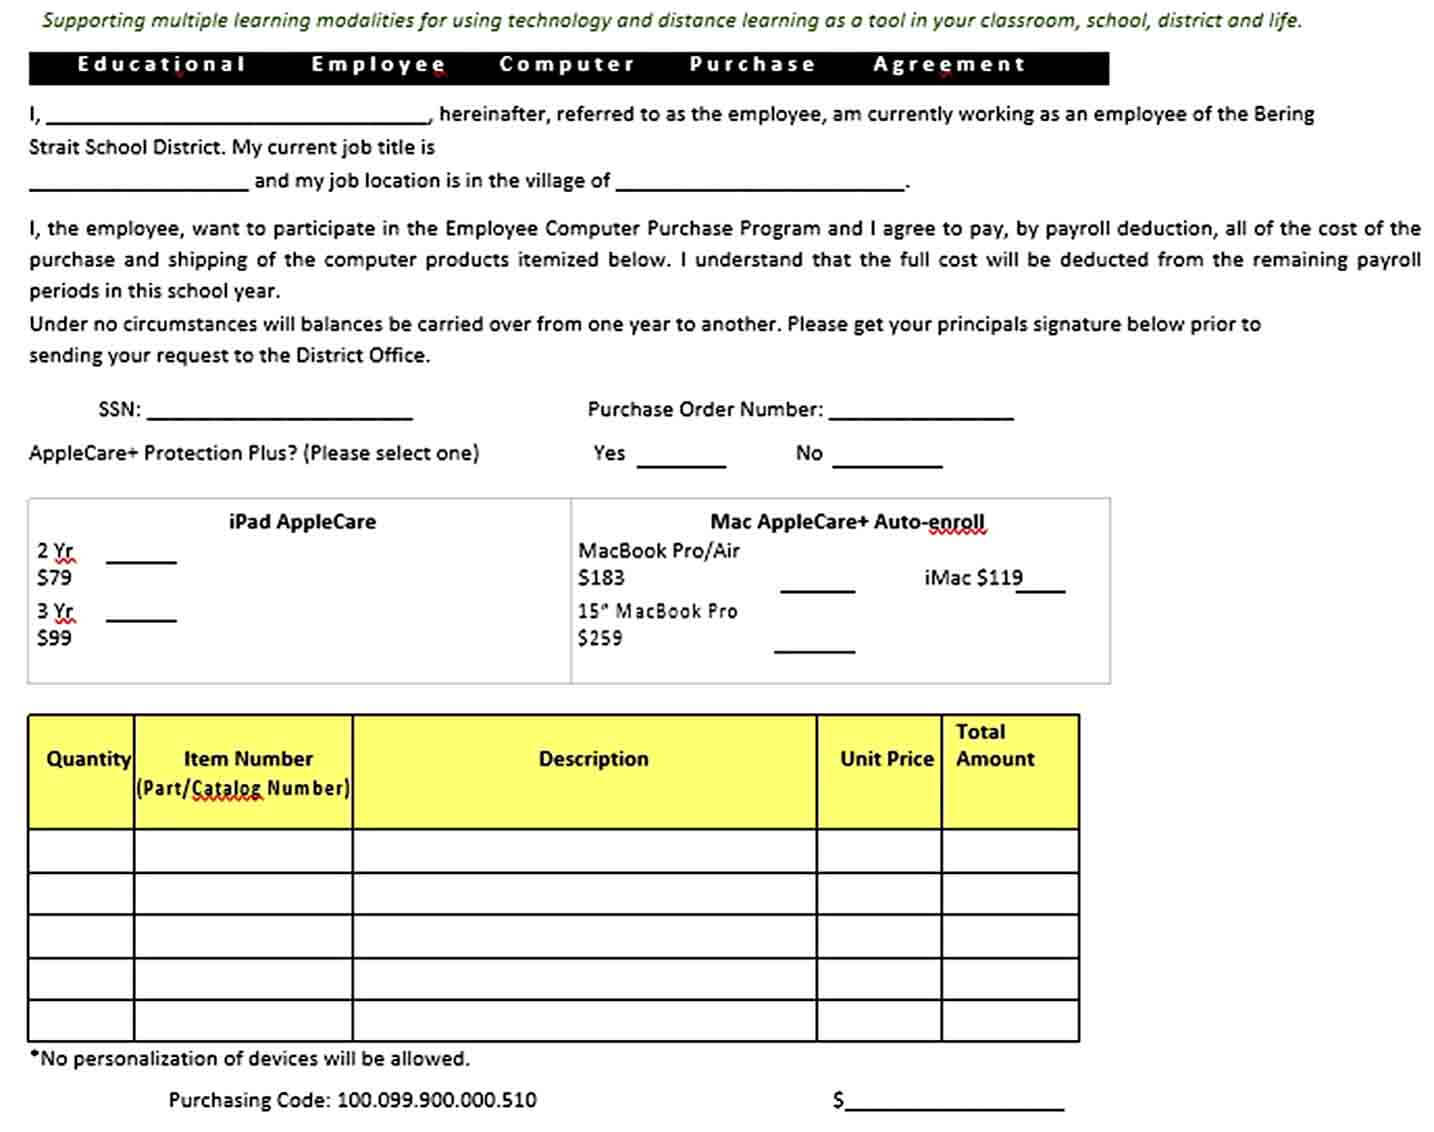 Sample Revised Employee Purchase Agreement